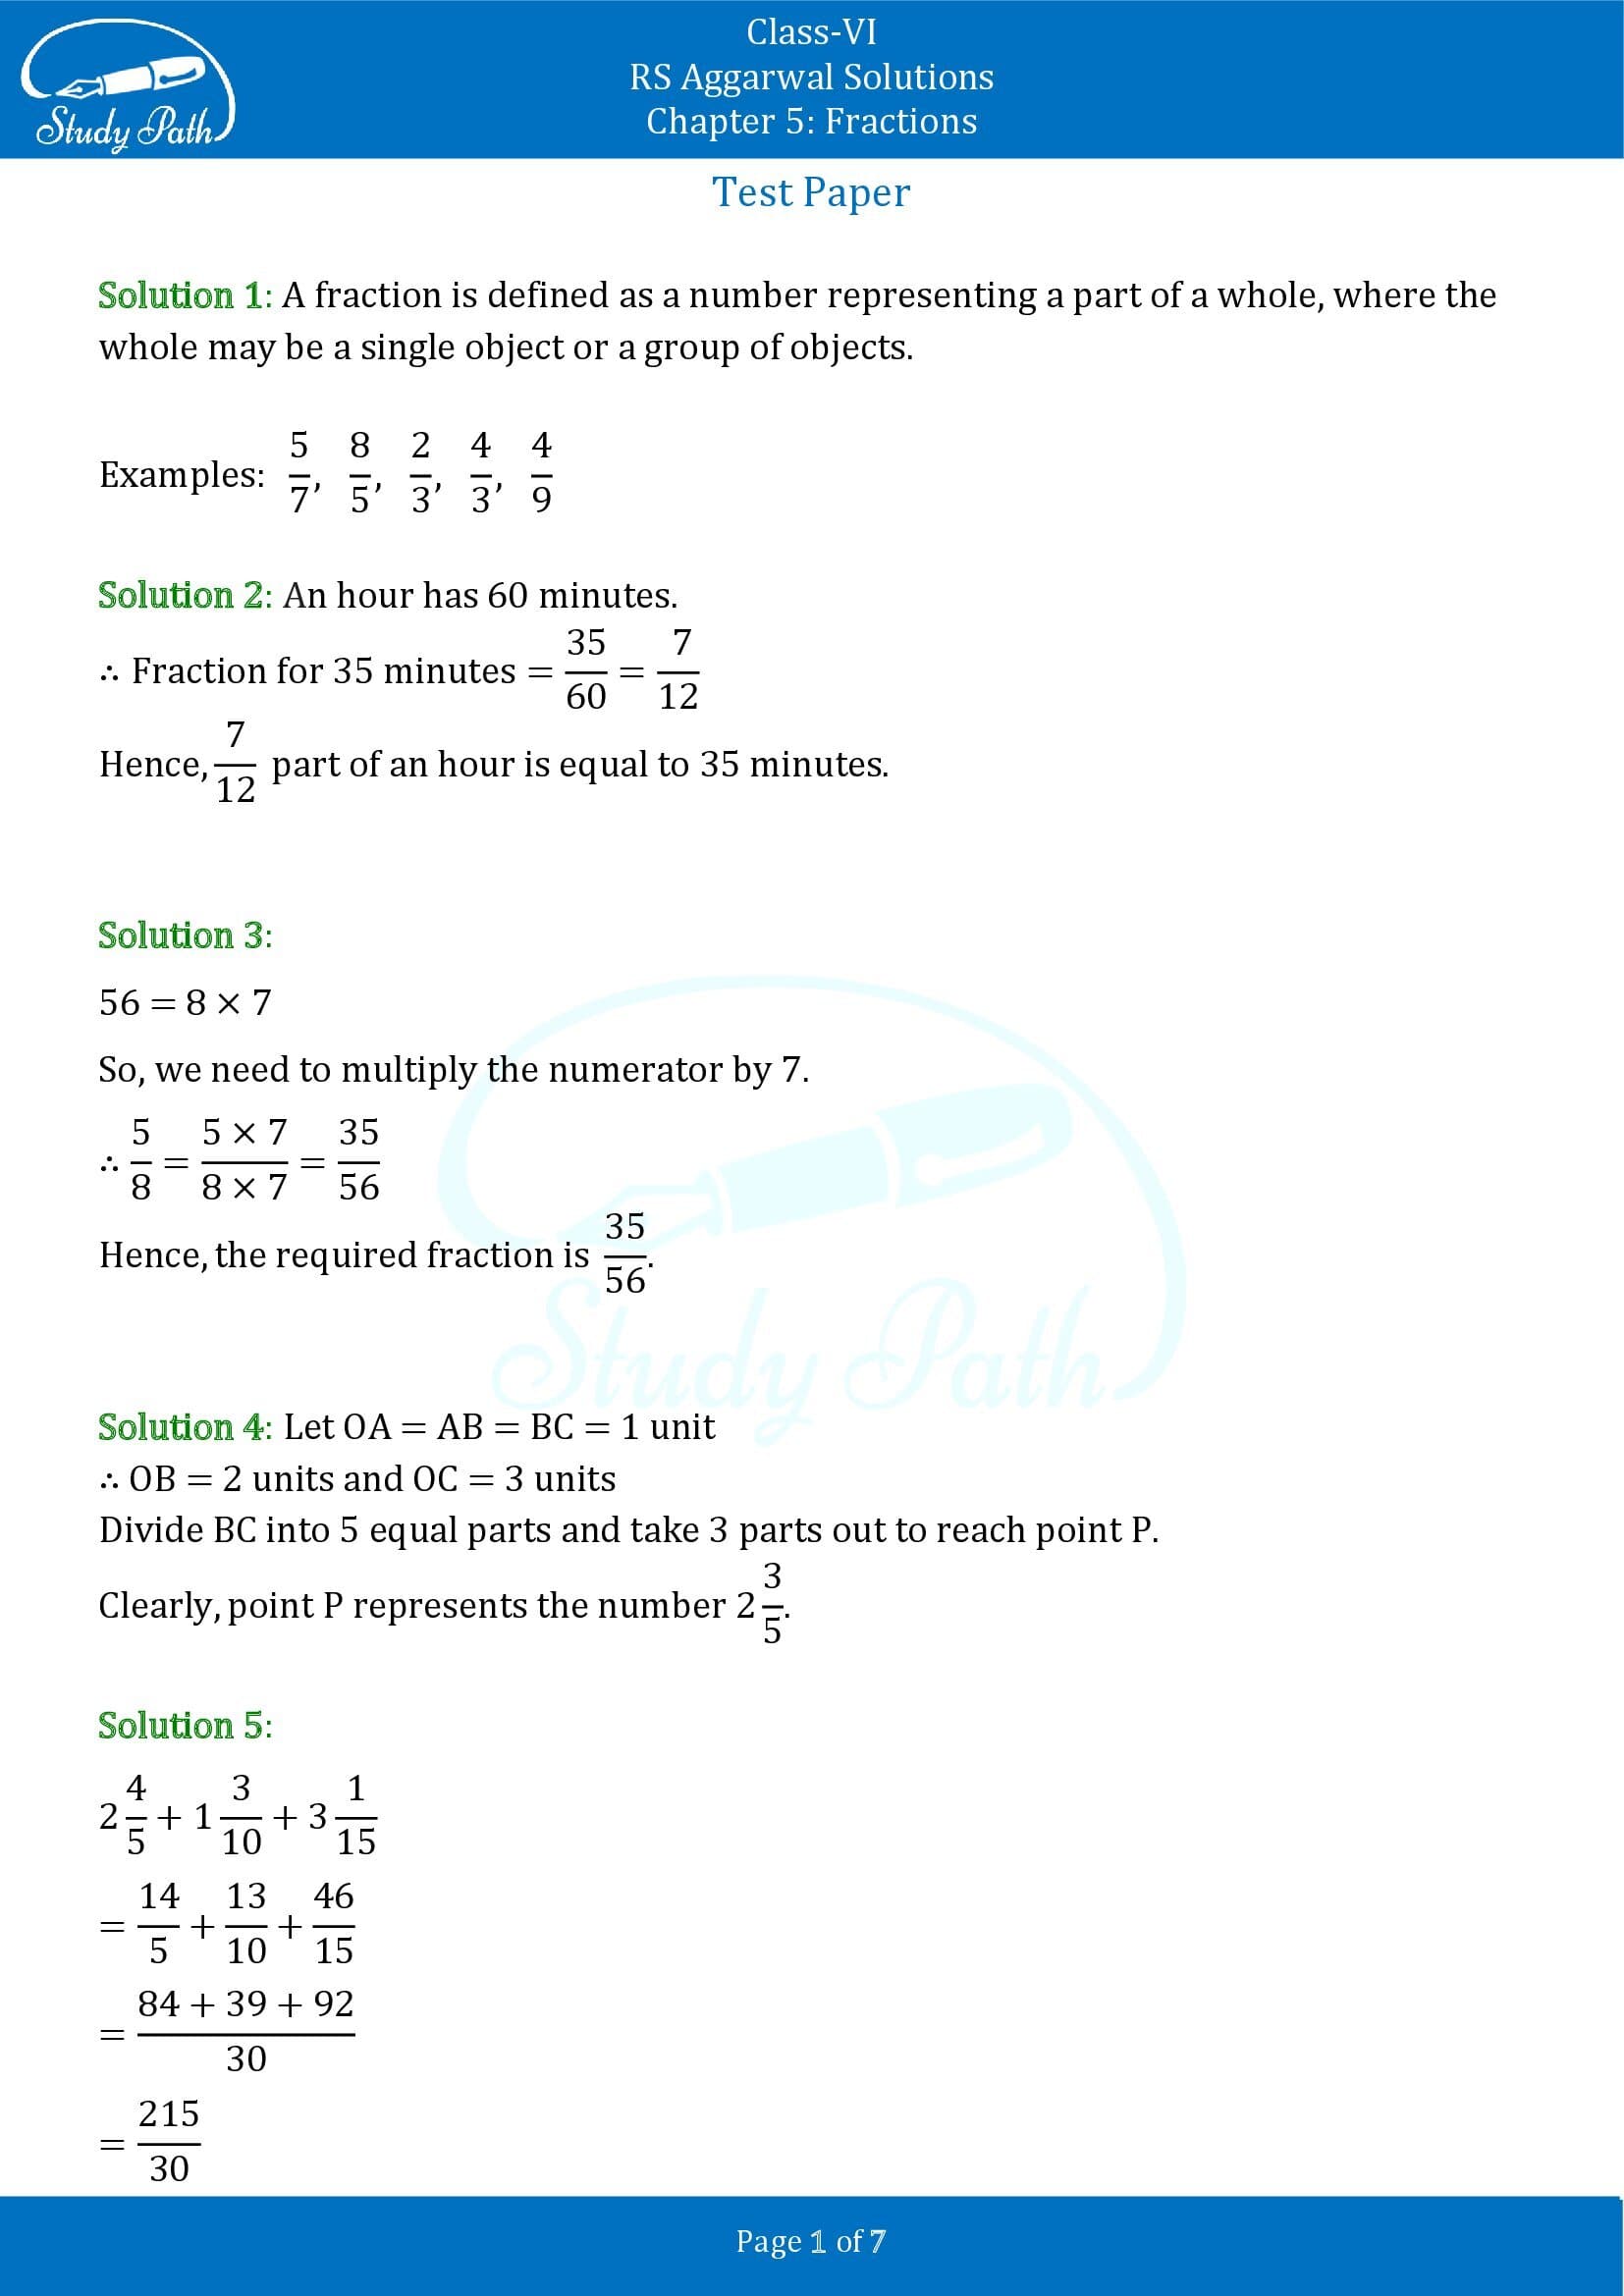 RS Aggarwal Solutions Class 6 Chapter 5 Fractions Test Paper 00001